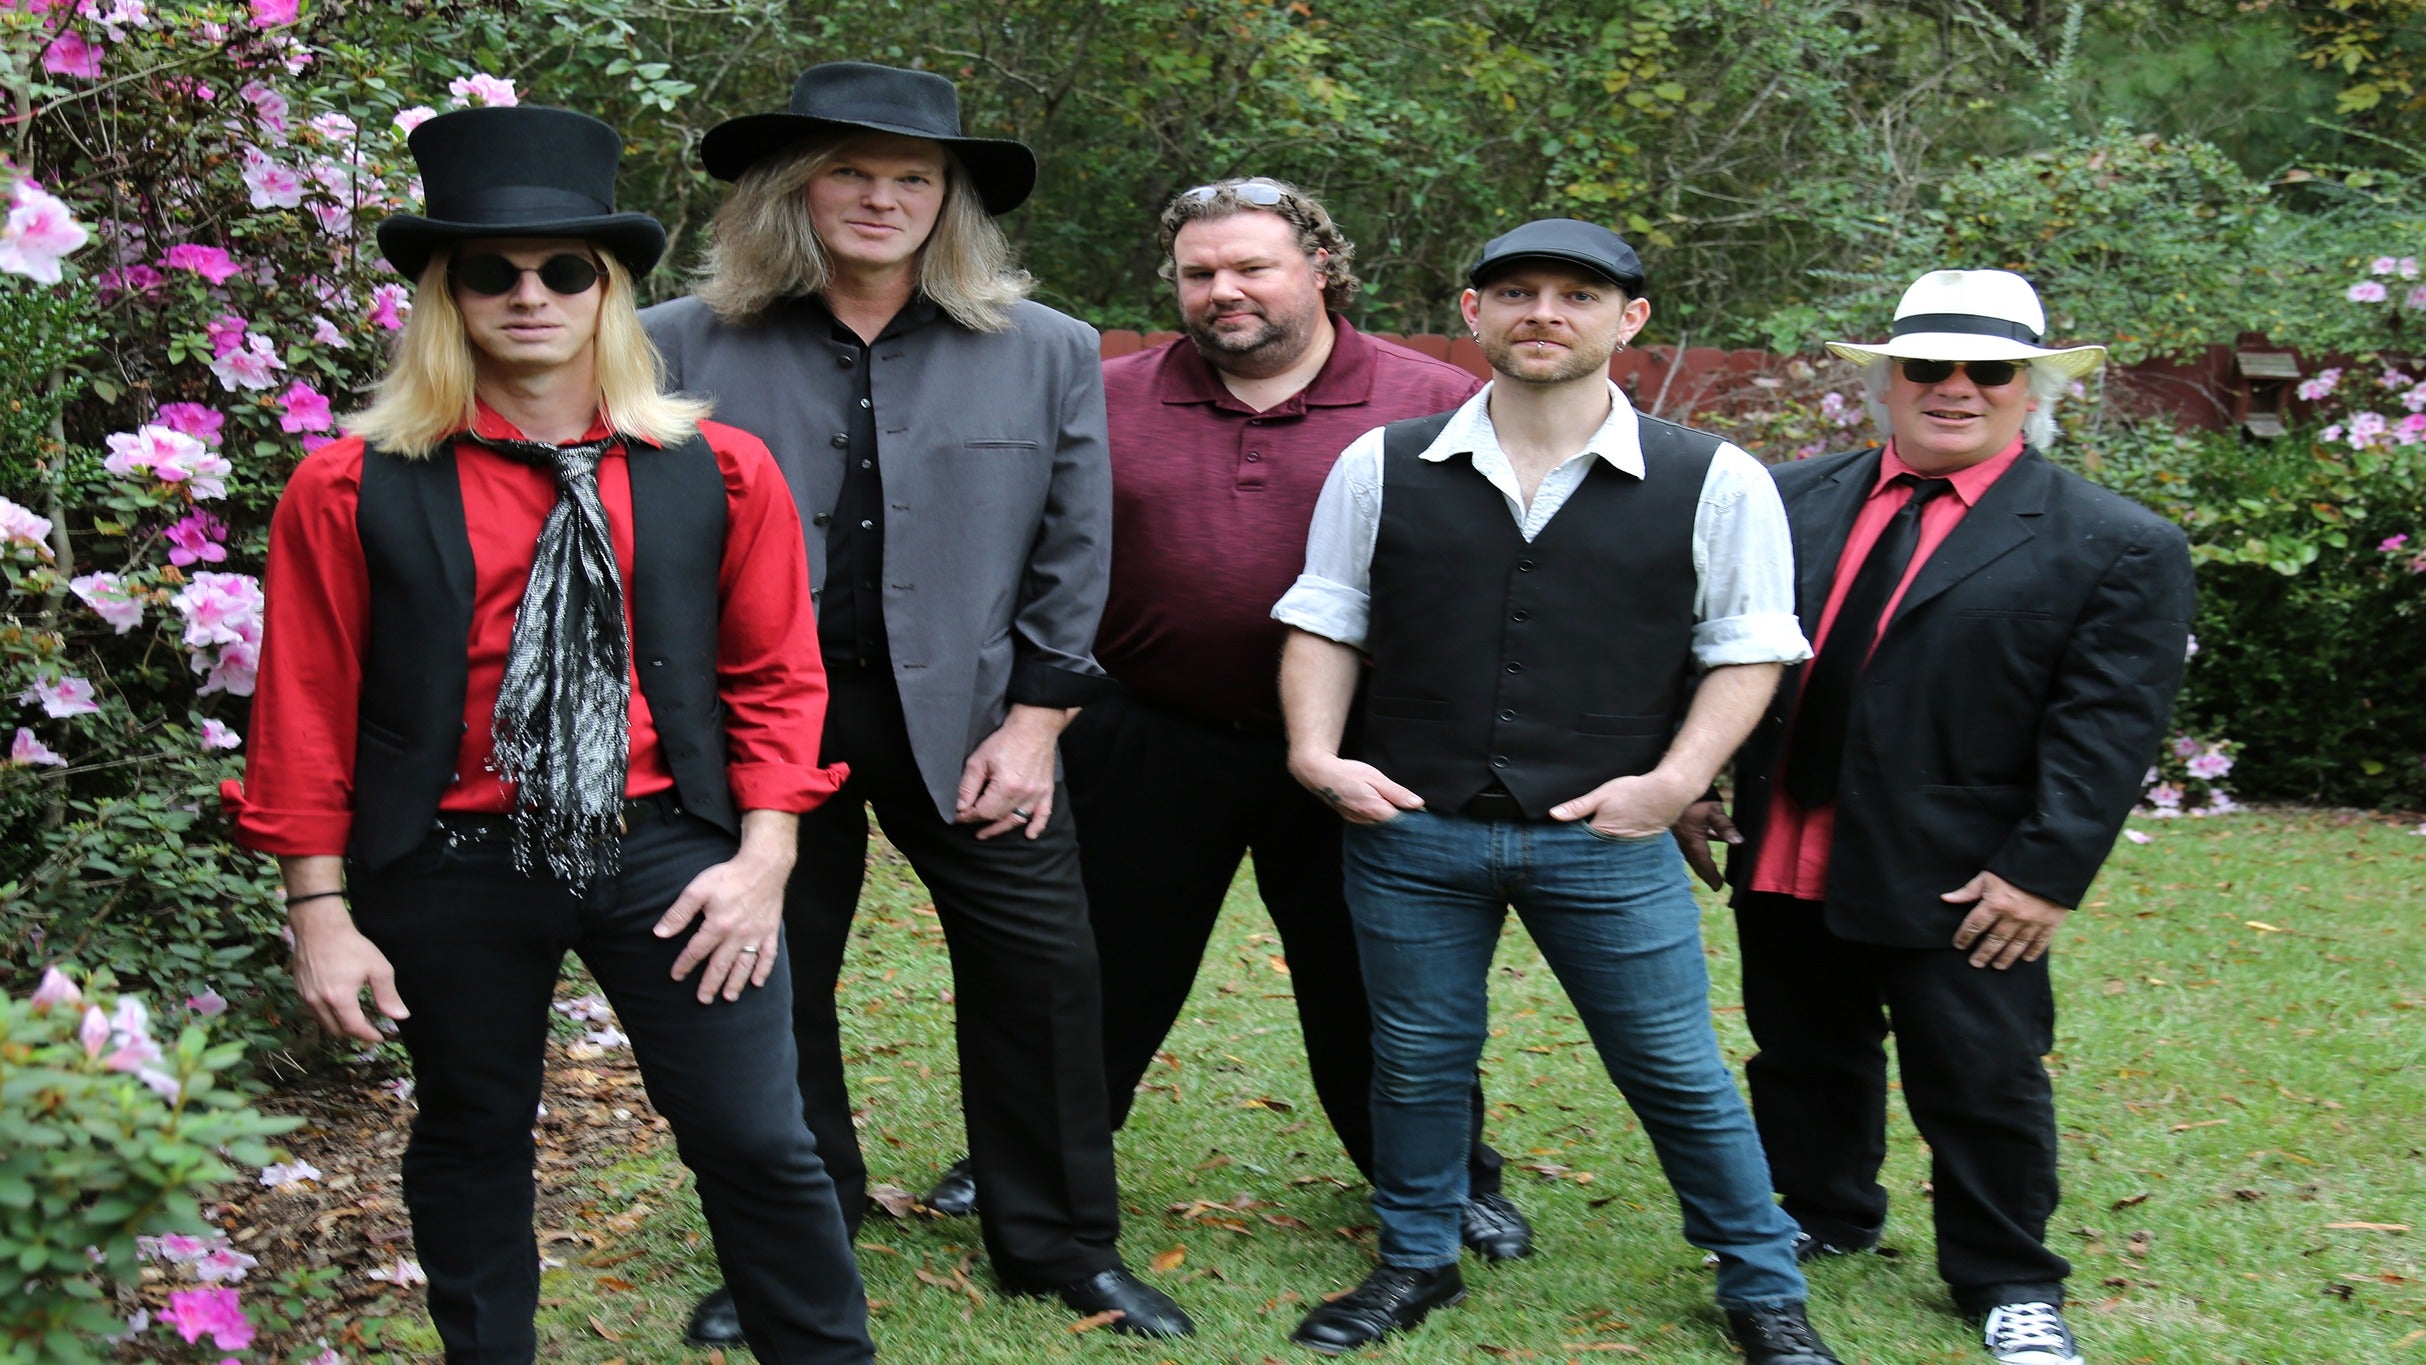 The Wildflowers - Tribute to Tom Petty & The Heartbreakers in North Myrtle Beach promo photo for Citi® Cardmember Preferred presale offer code